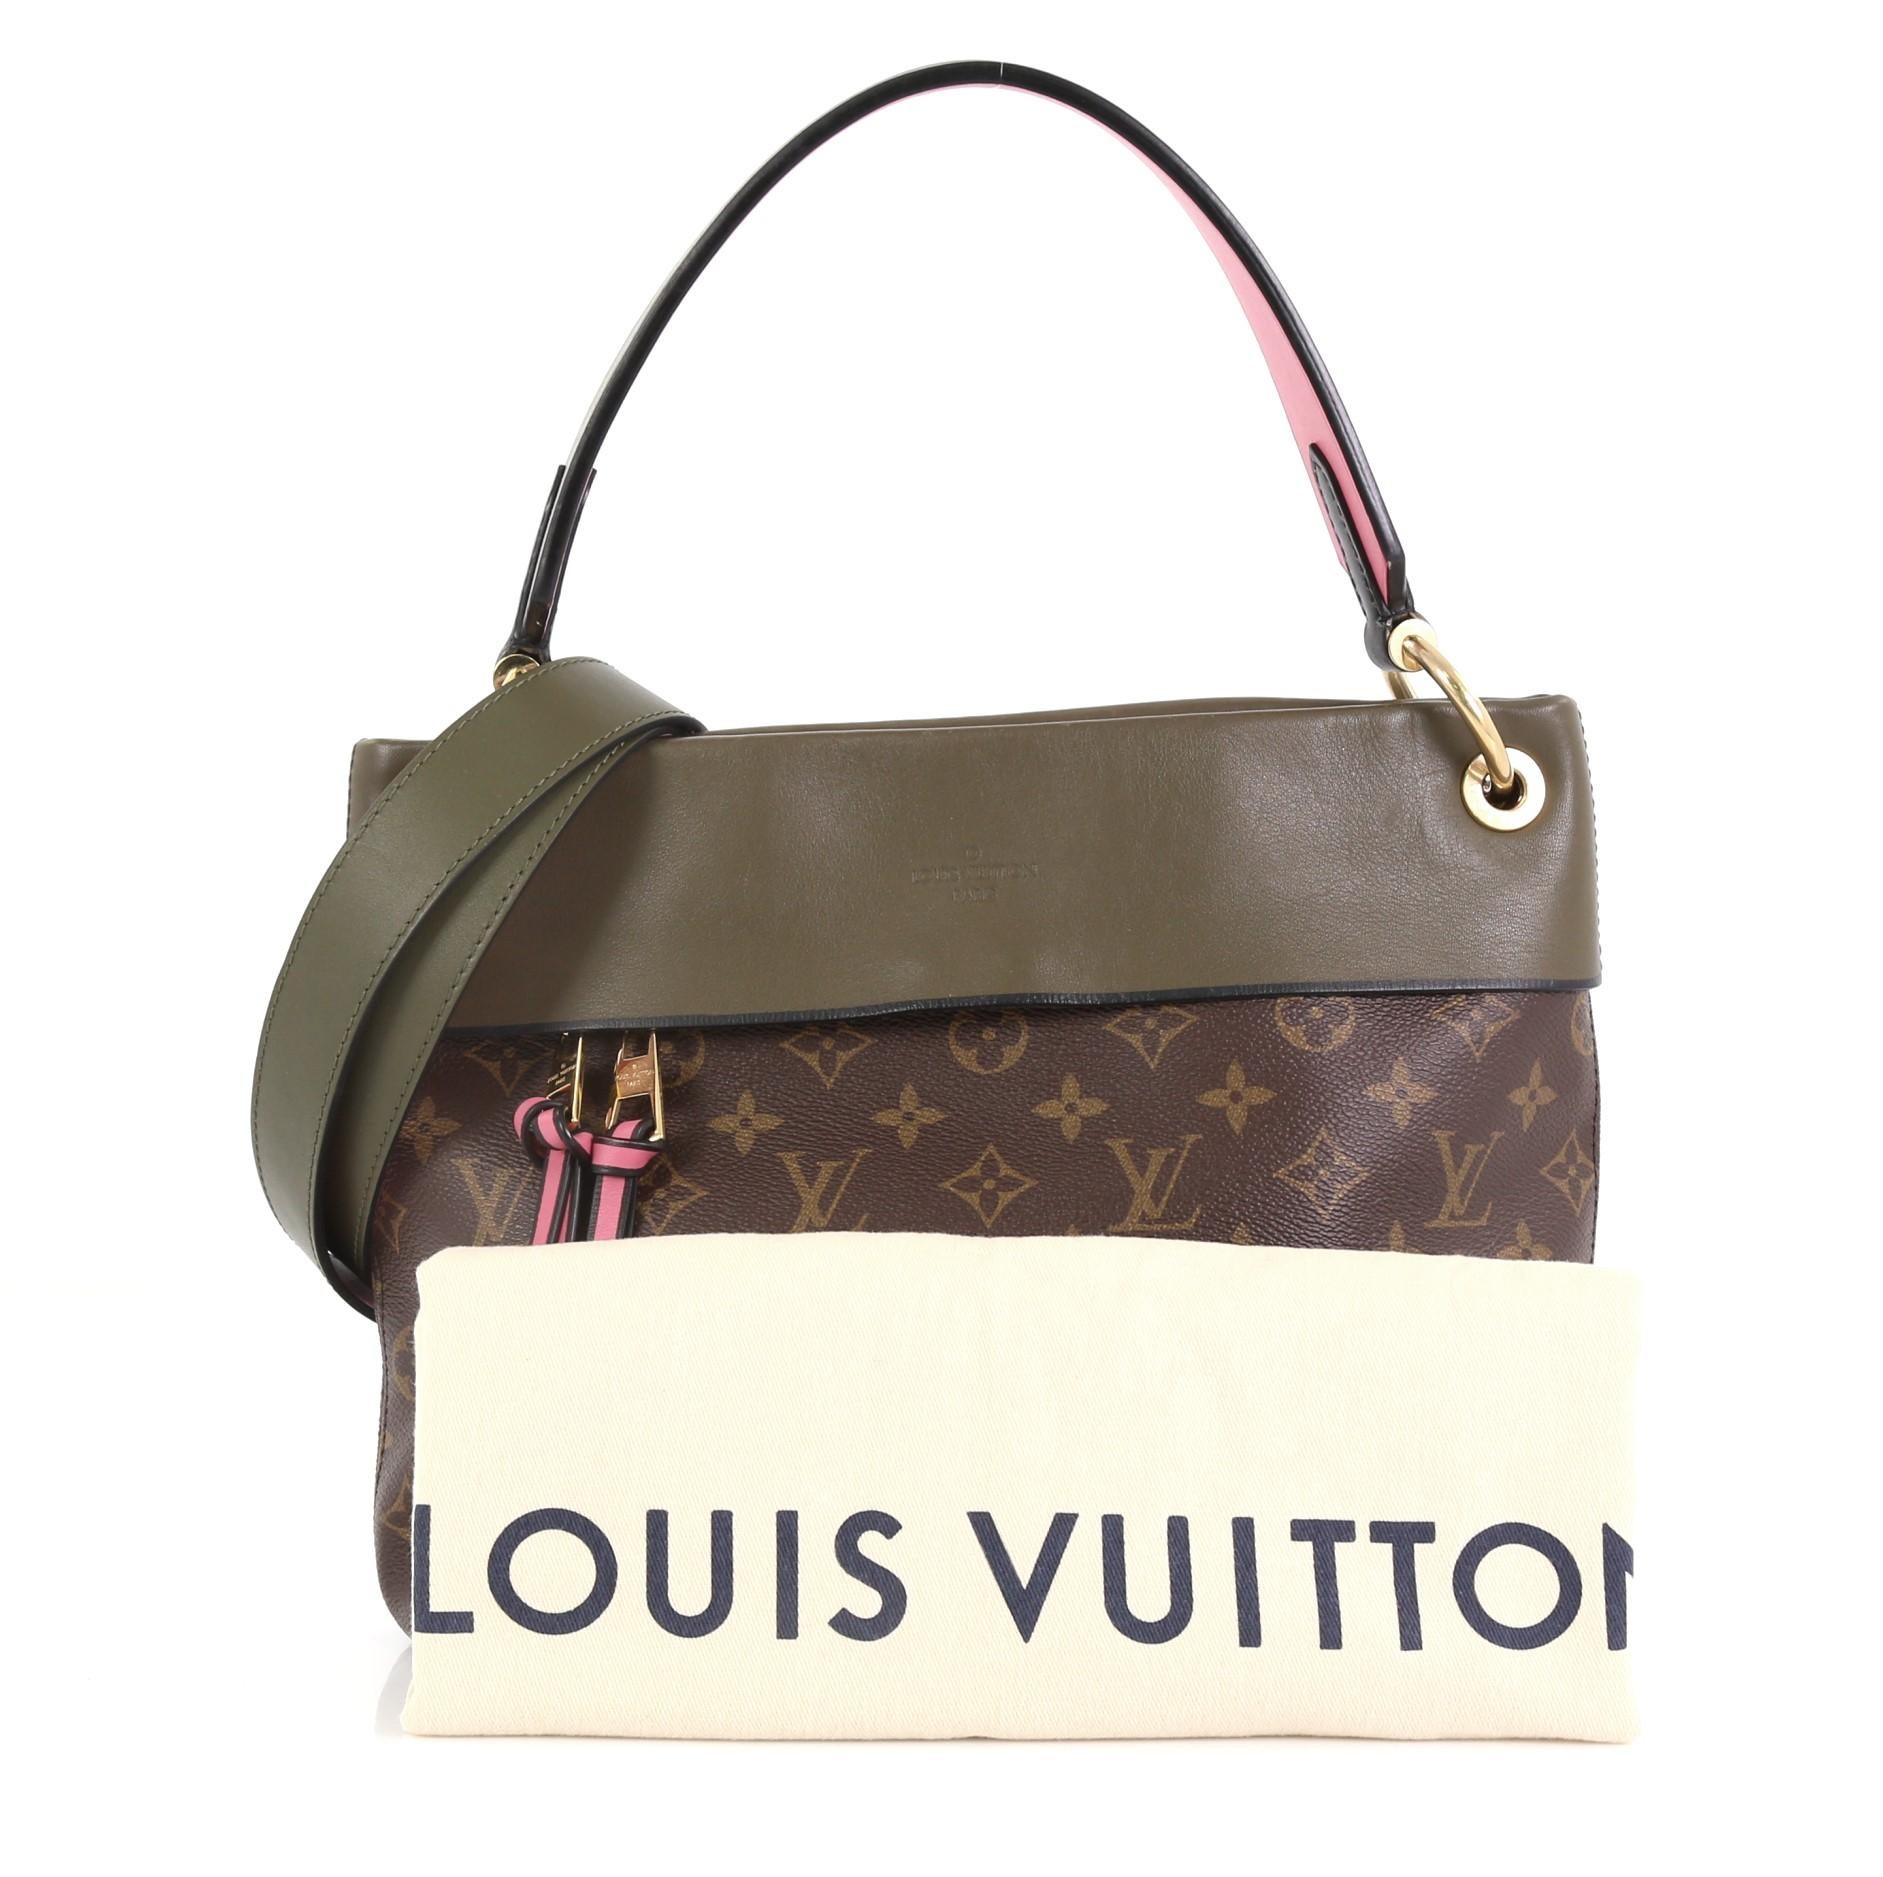 This Louis Vuitton Tuileries Besace Bag Monogram Canvas with Leather, crafted in brown monogram coated canvas with green and pink leather, features a single loop leather handle and gold-tone hardware. Its hidden magnetic snap closure opens to a pink